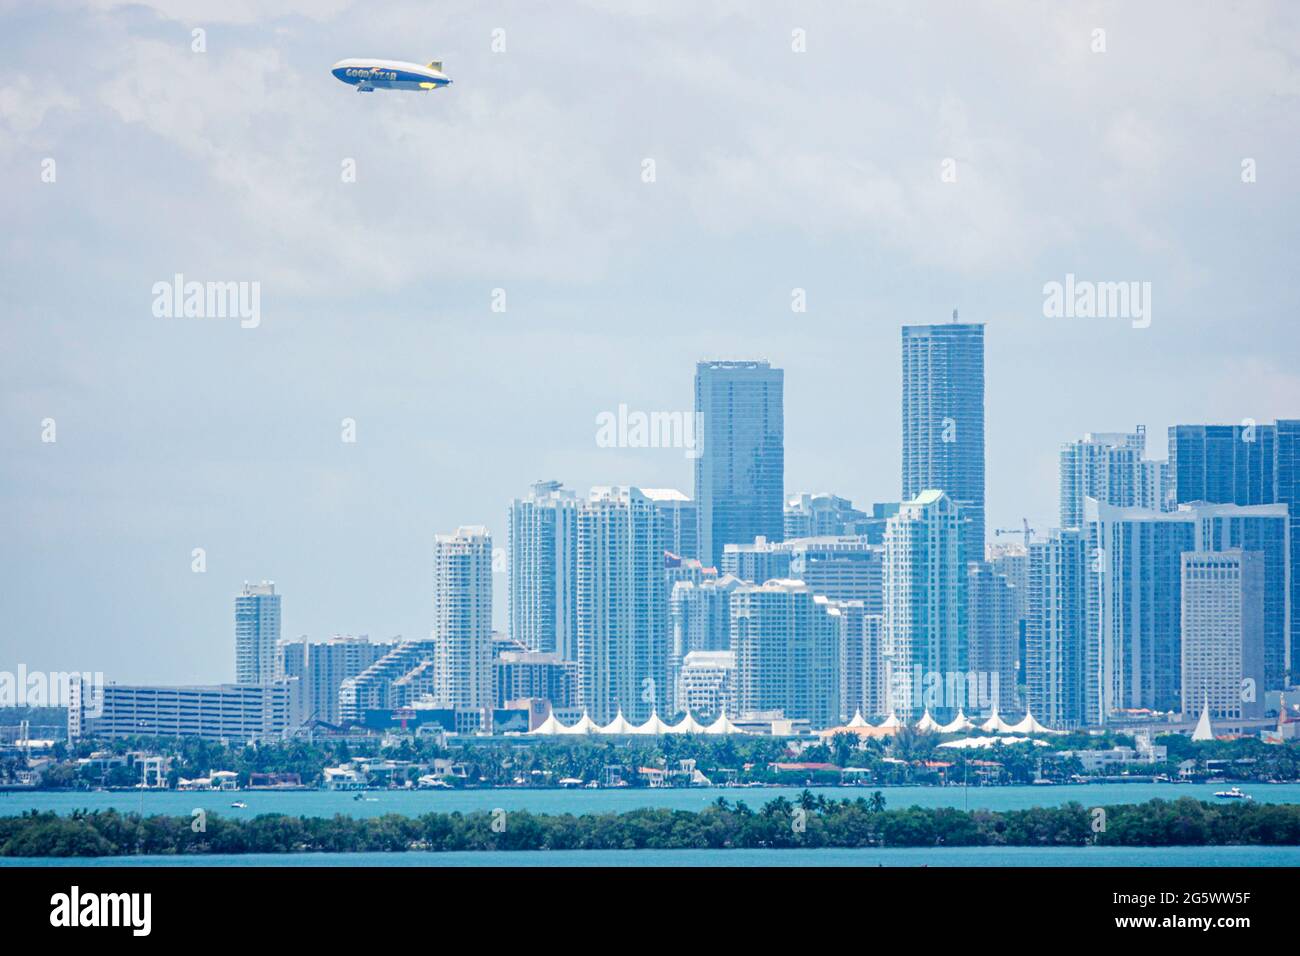 Florida Miami Biscayne Bay downtown city skyline tall buildings skyscrapers towers Goodyear Blimp Stock Photo